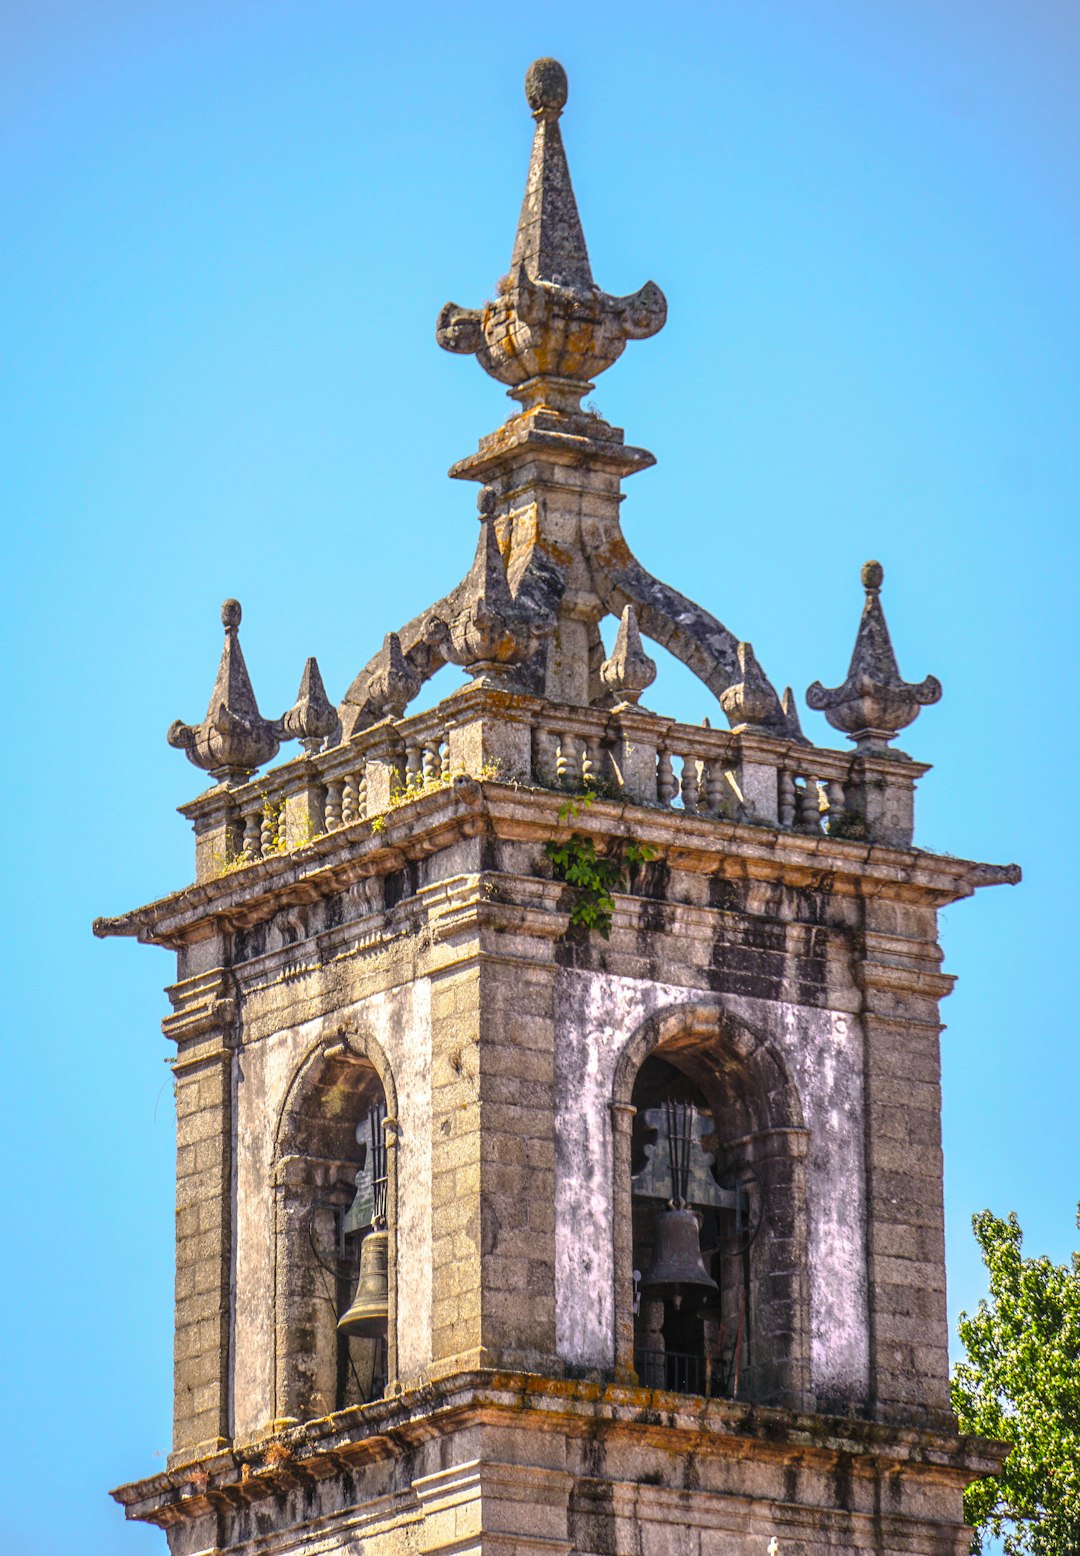 Travel Tips and Stories of Amarante in Portugal